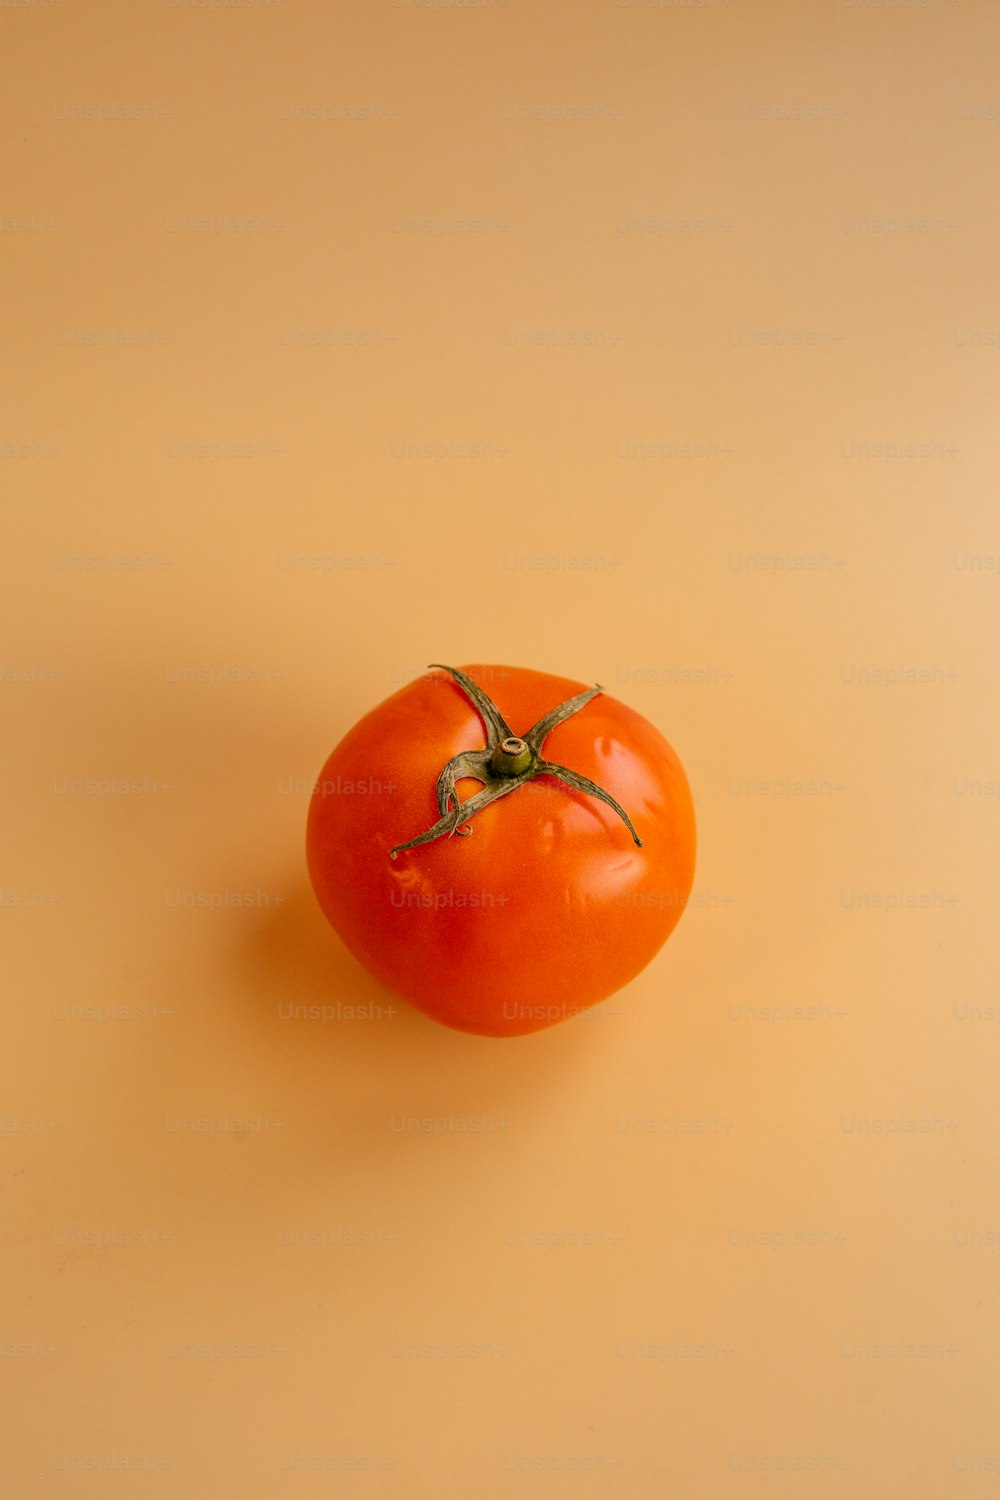 a tomato with a stem